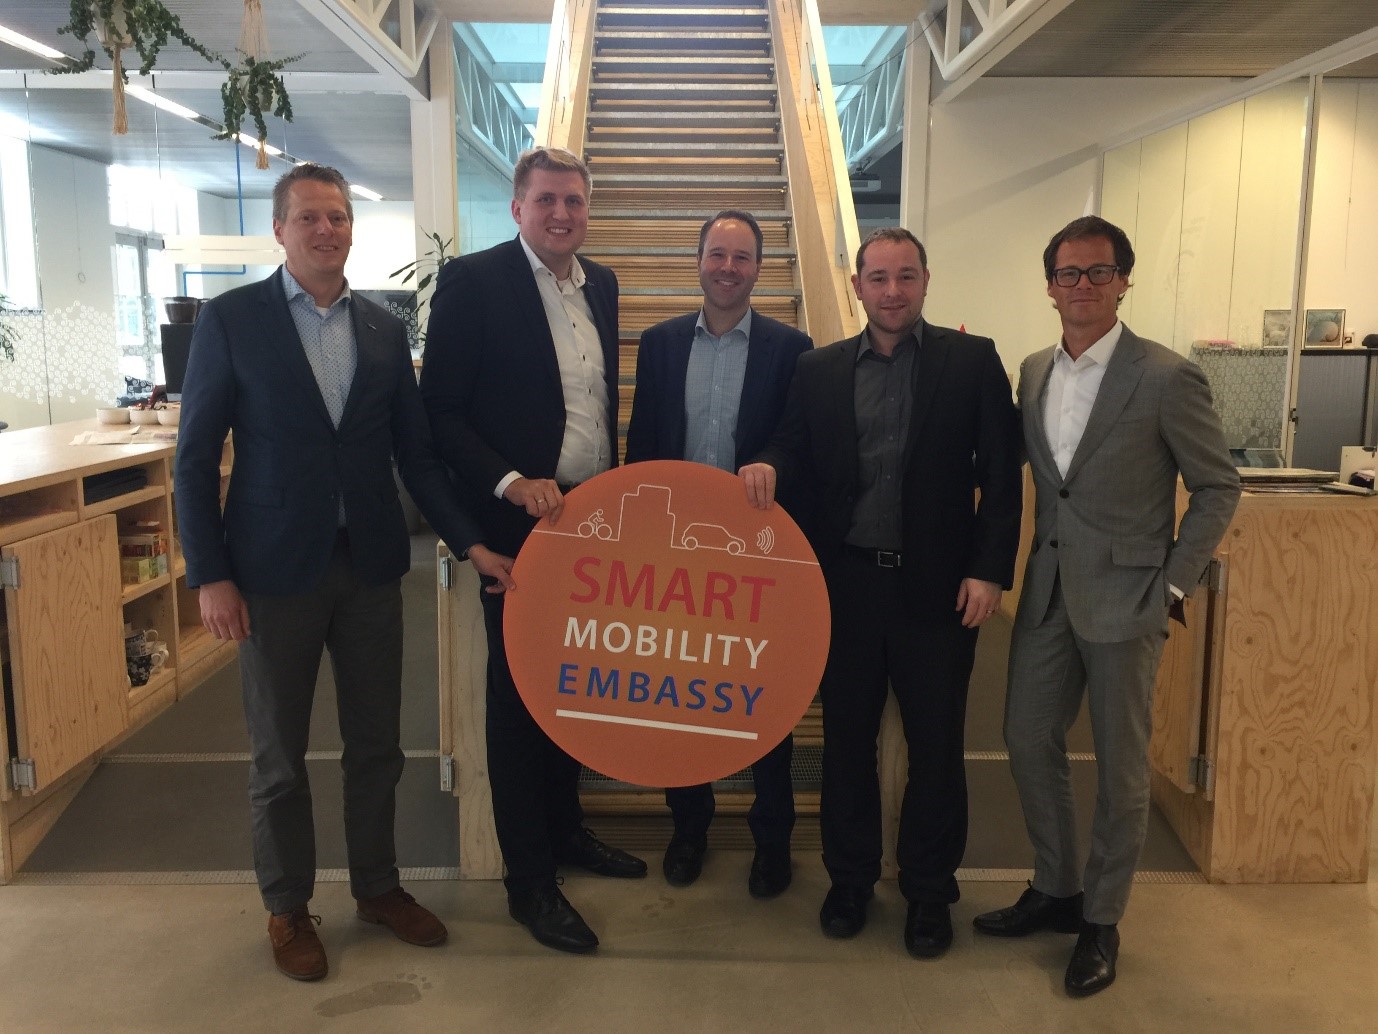 Australian delegates from Infrastructure Victoria visited the Smart Mobility Embassy